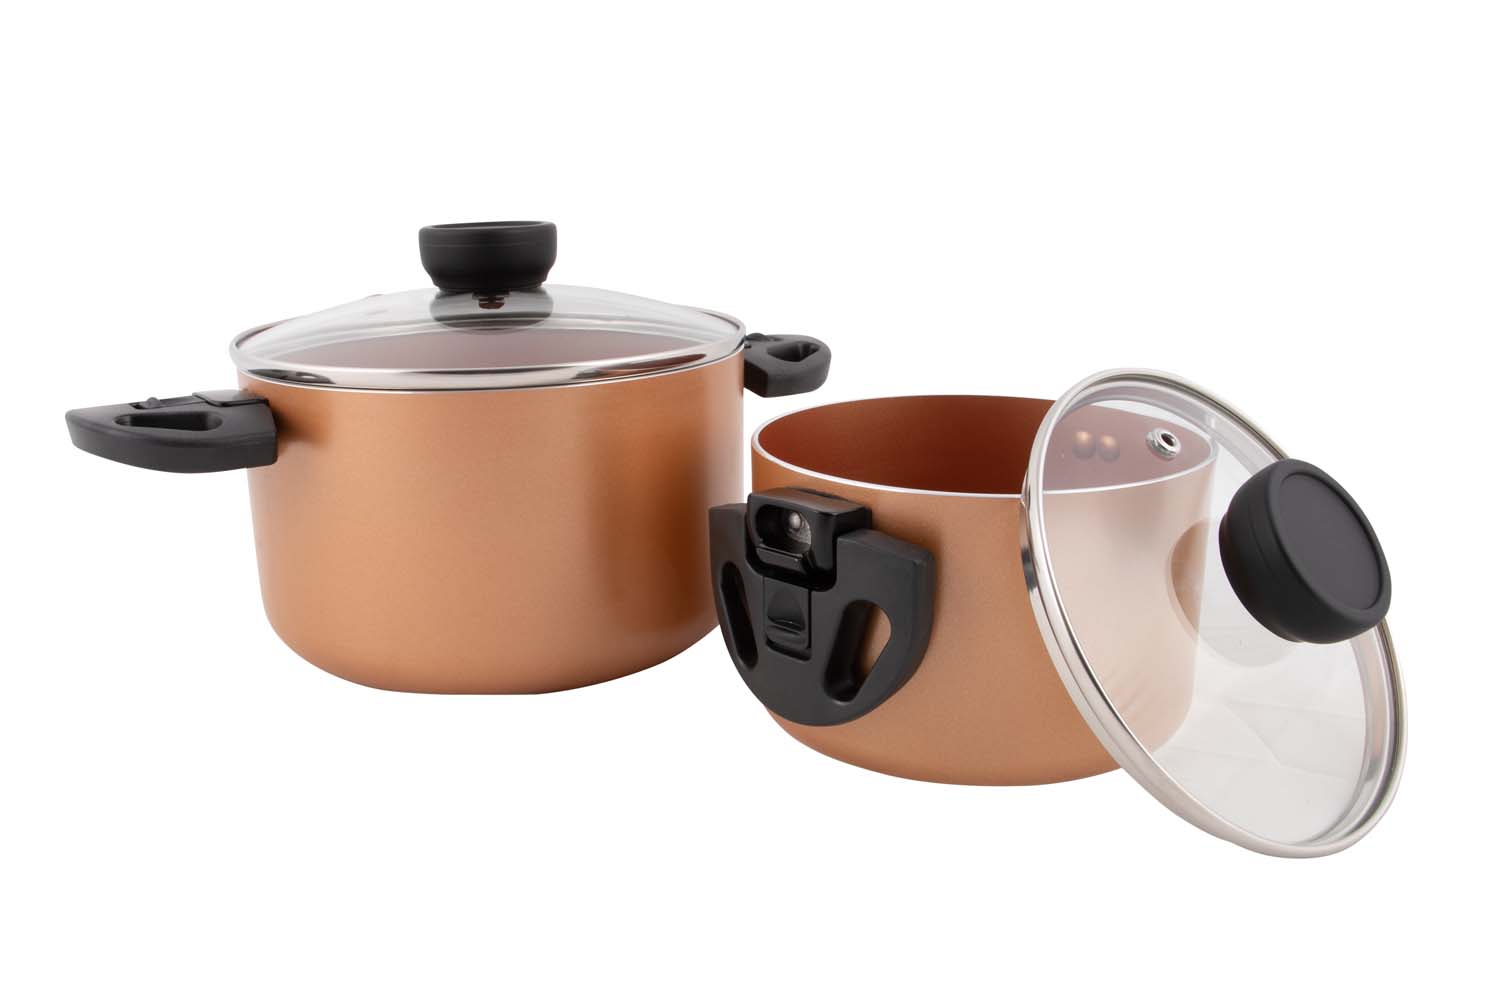 2304550 A bronze-colored 2-piece cookware set from the Industrial collection. The ceramic coating prevents sticking, is scratch resistant and easy to clean. In addition, it is healthier cooking because less fat is needed for frying. These cooking pans feature sturdy and heat-resistant fold-away handles. These handles can be easily folded down after use so the pans are fully nestable and compact for storage. The pans also feature a heat-resistant knob on the glass lid. For use on gas, ceramic, electric and induction. Dimensions (Øxh): 14x8 (1.2 L), 18x11 (2.8 L)